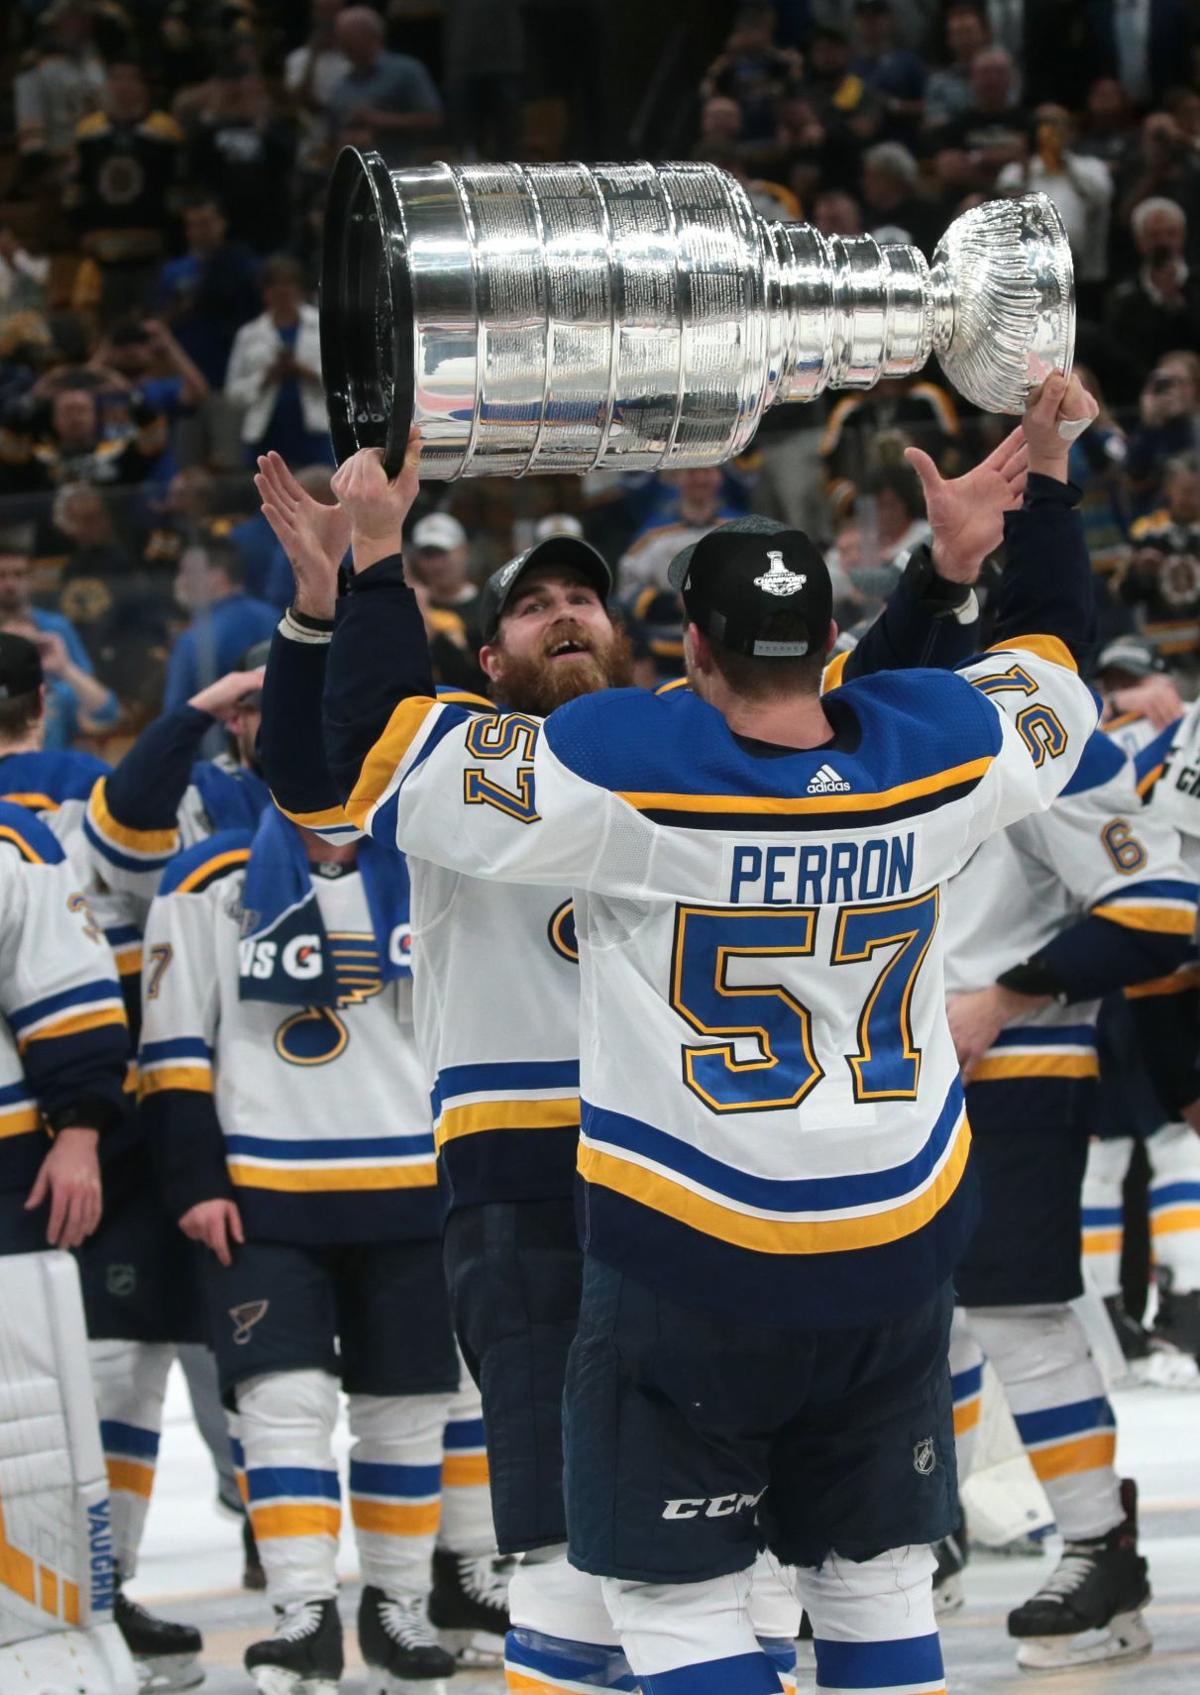 St. Louis Blues Claim the Stanley Cup, Ending a 52-Year Wait - The New York  Times